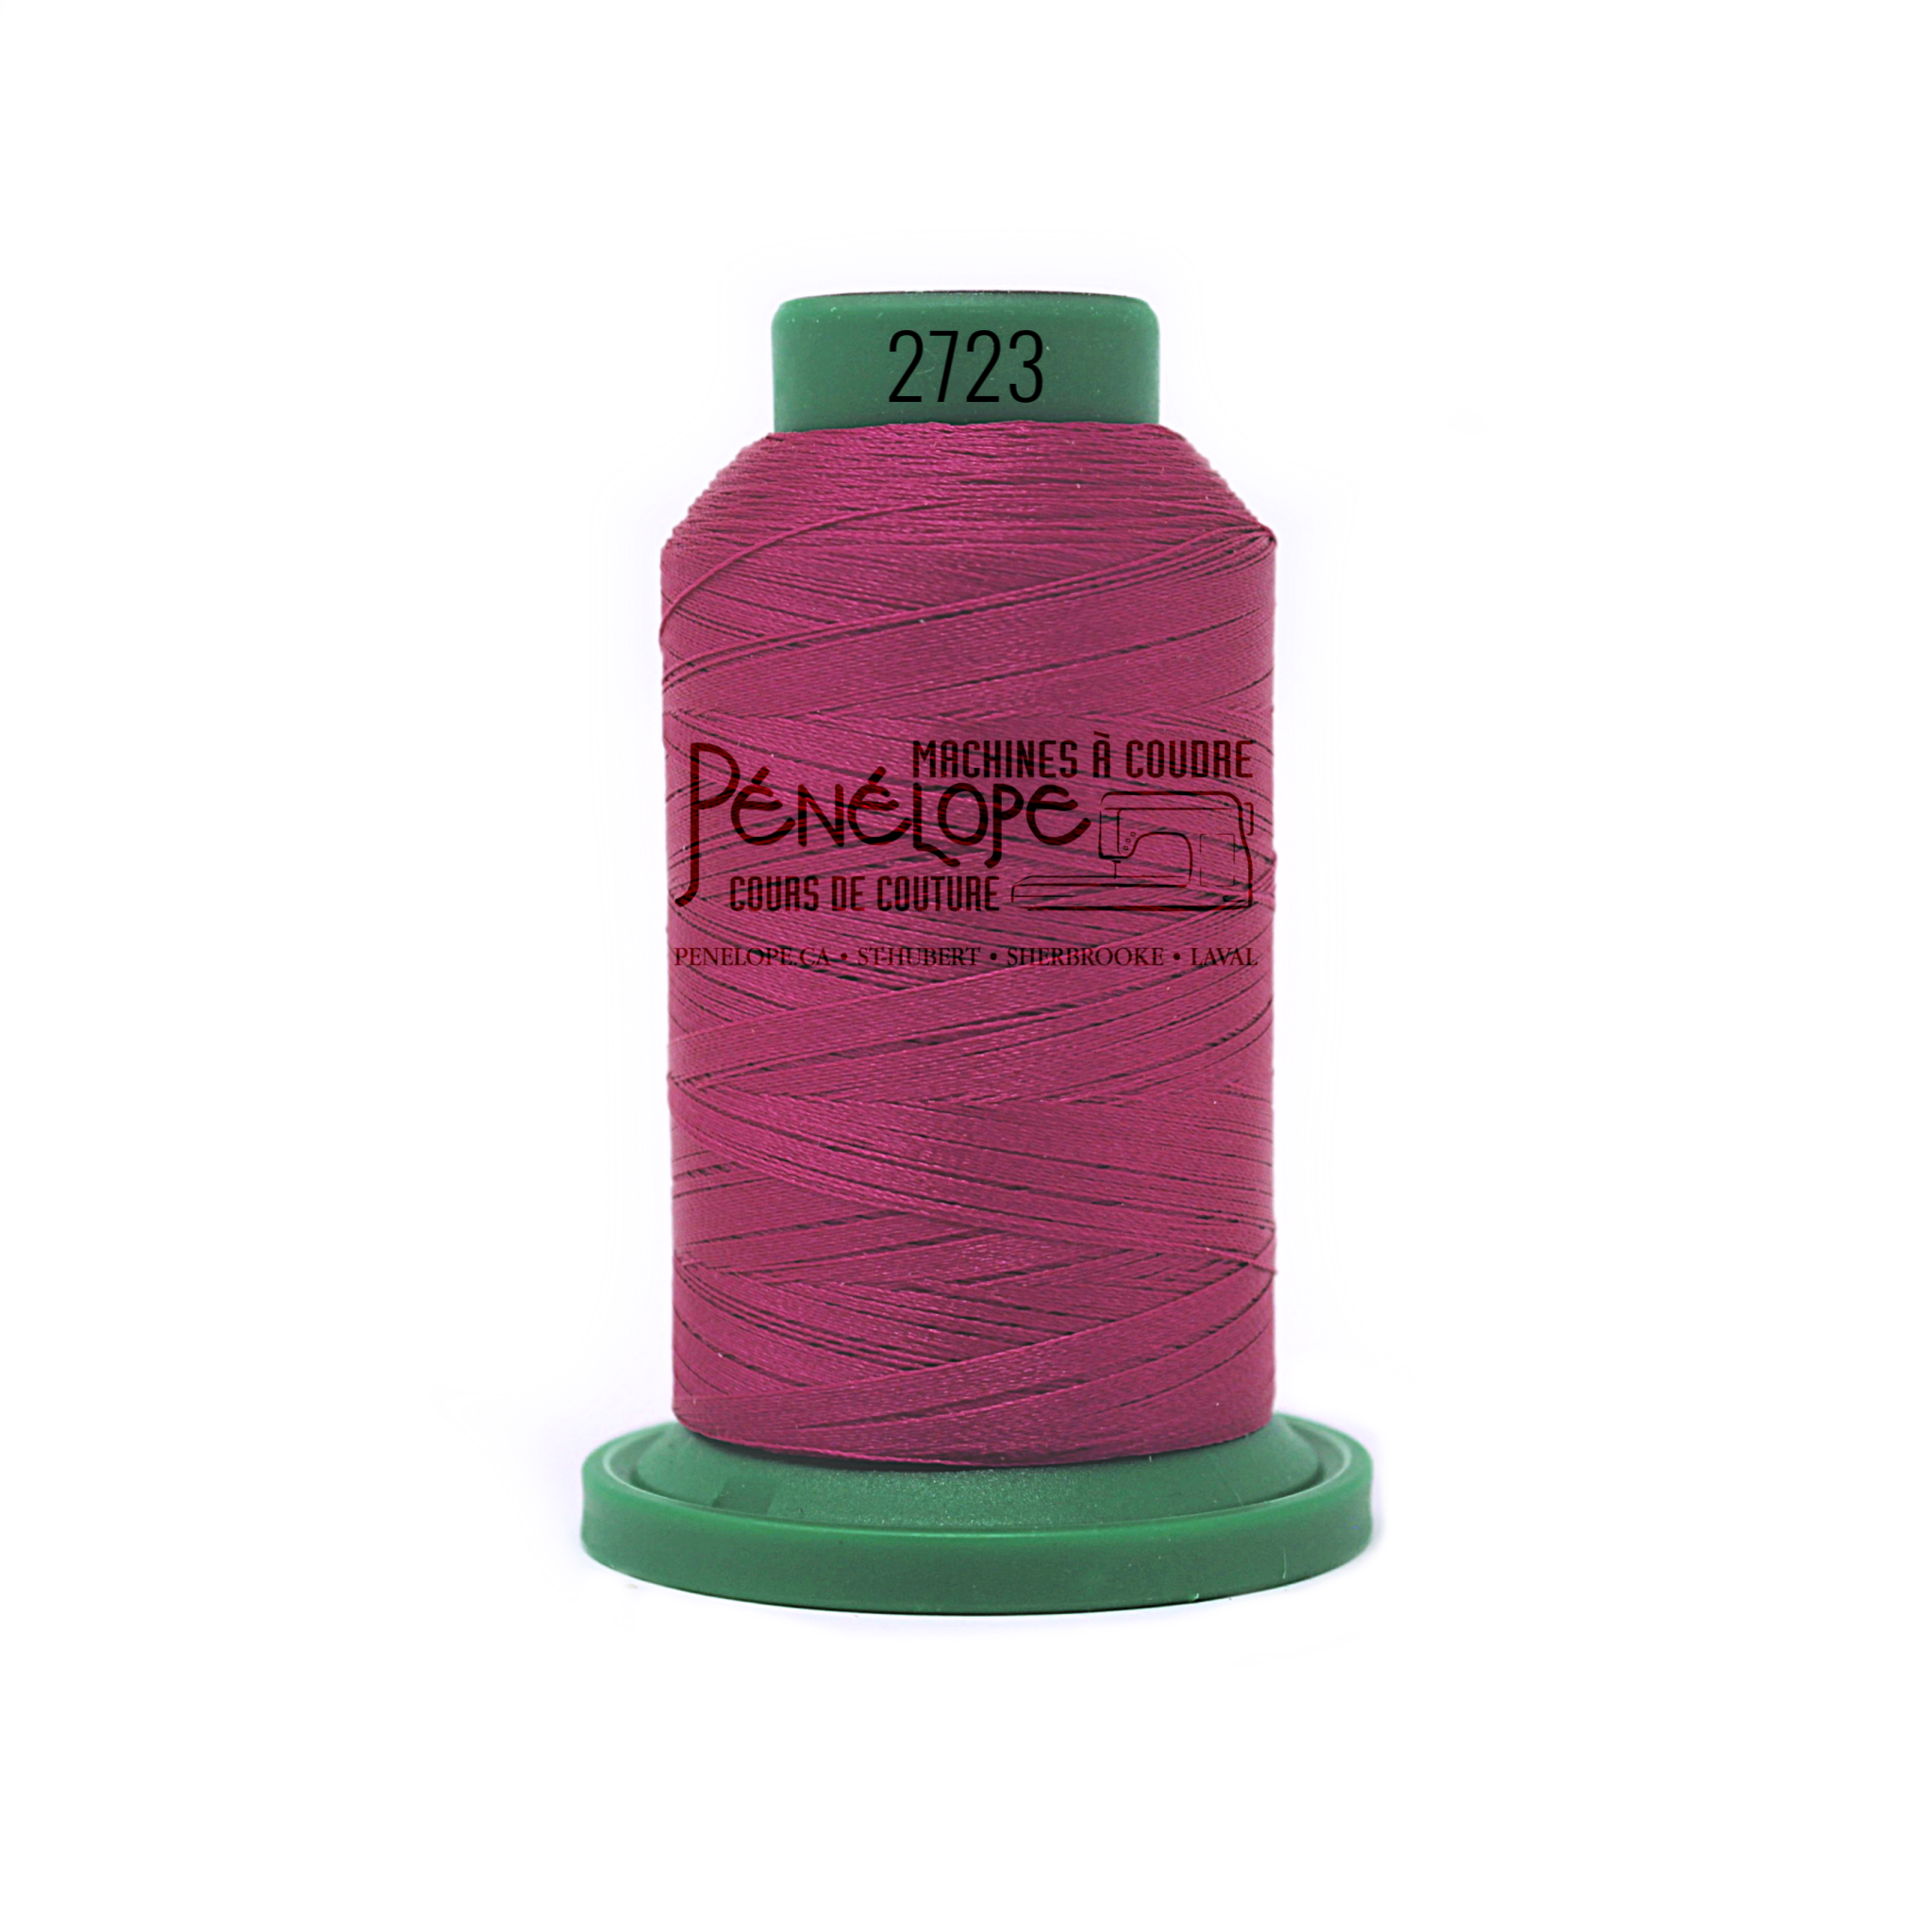 Isacord Isacord sewing and embroidery thread 2723